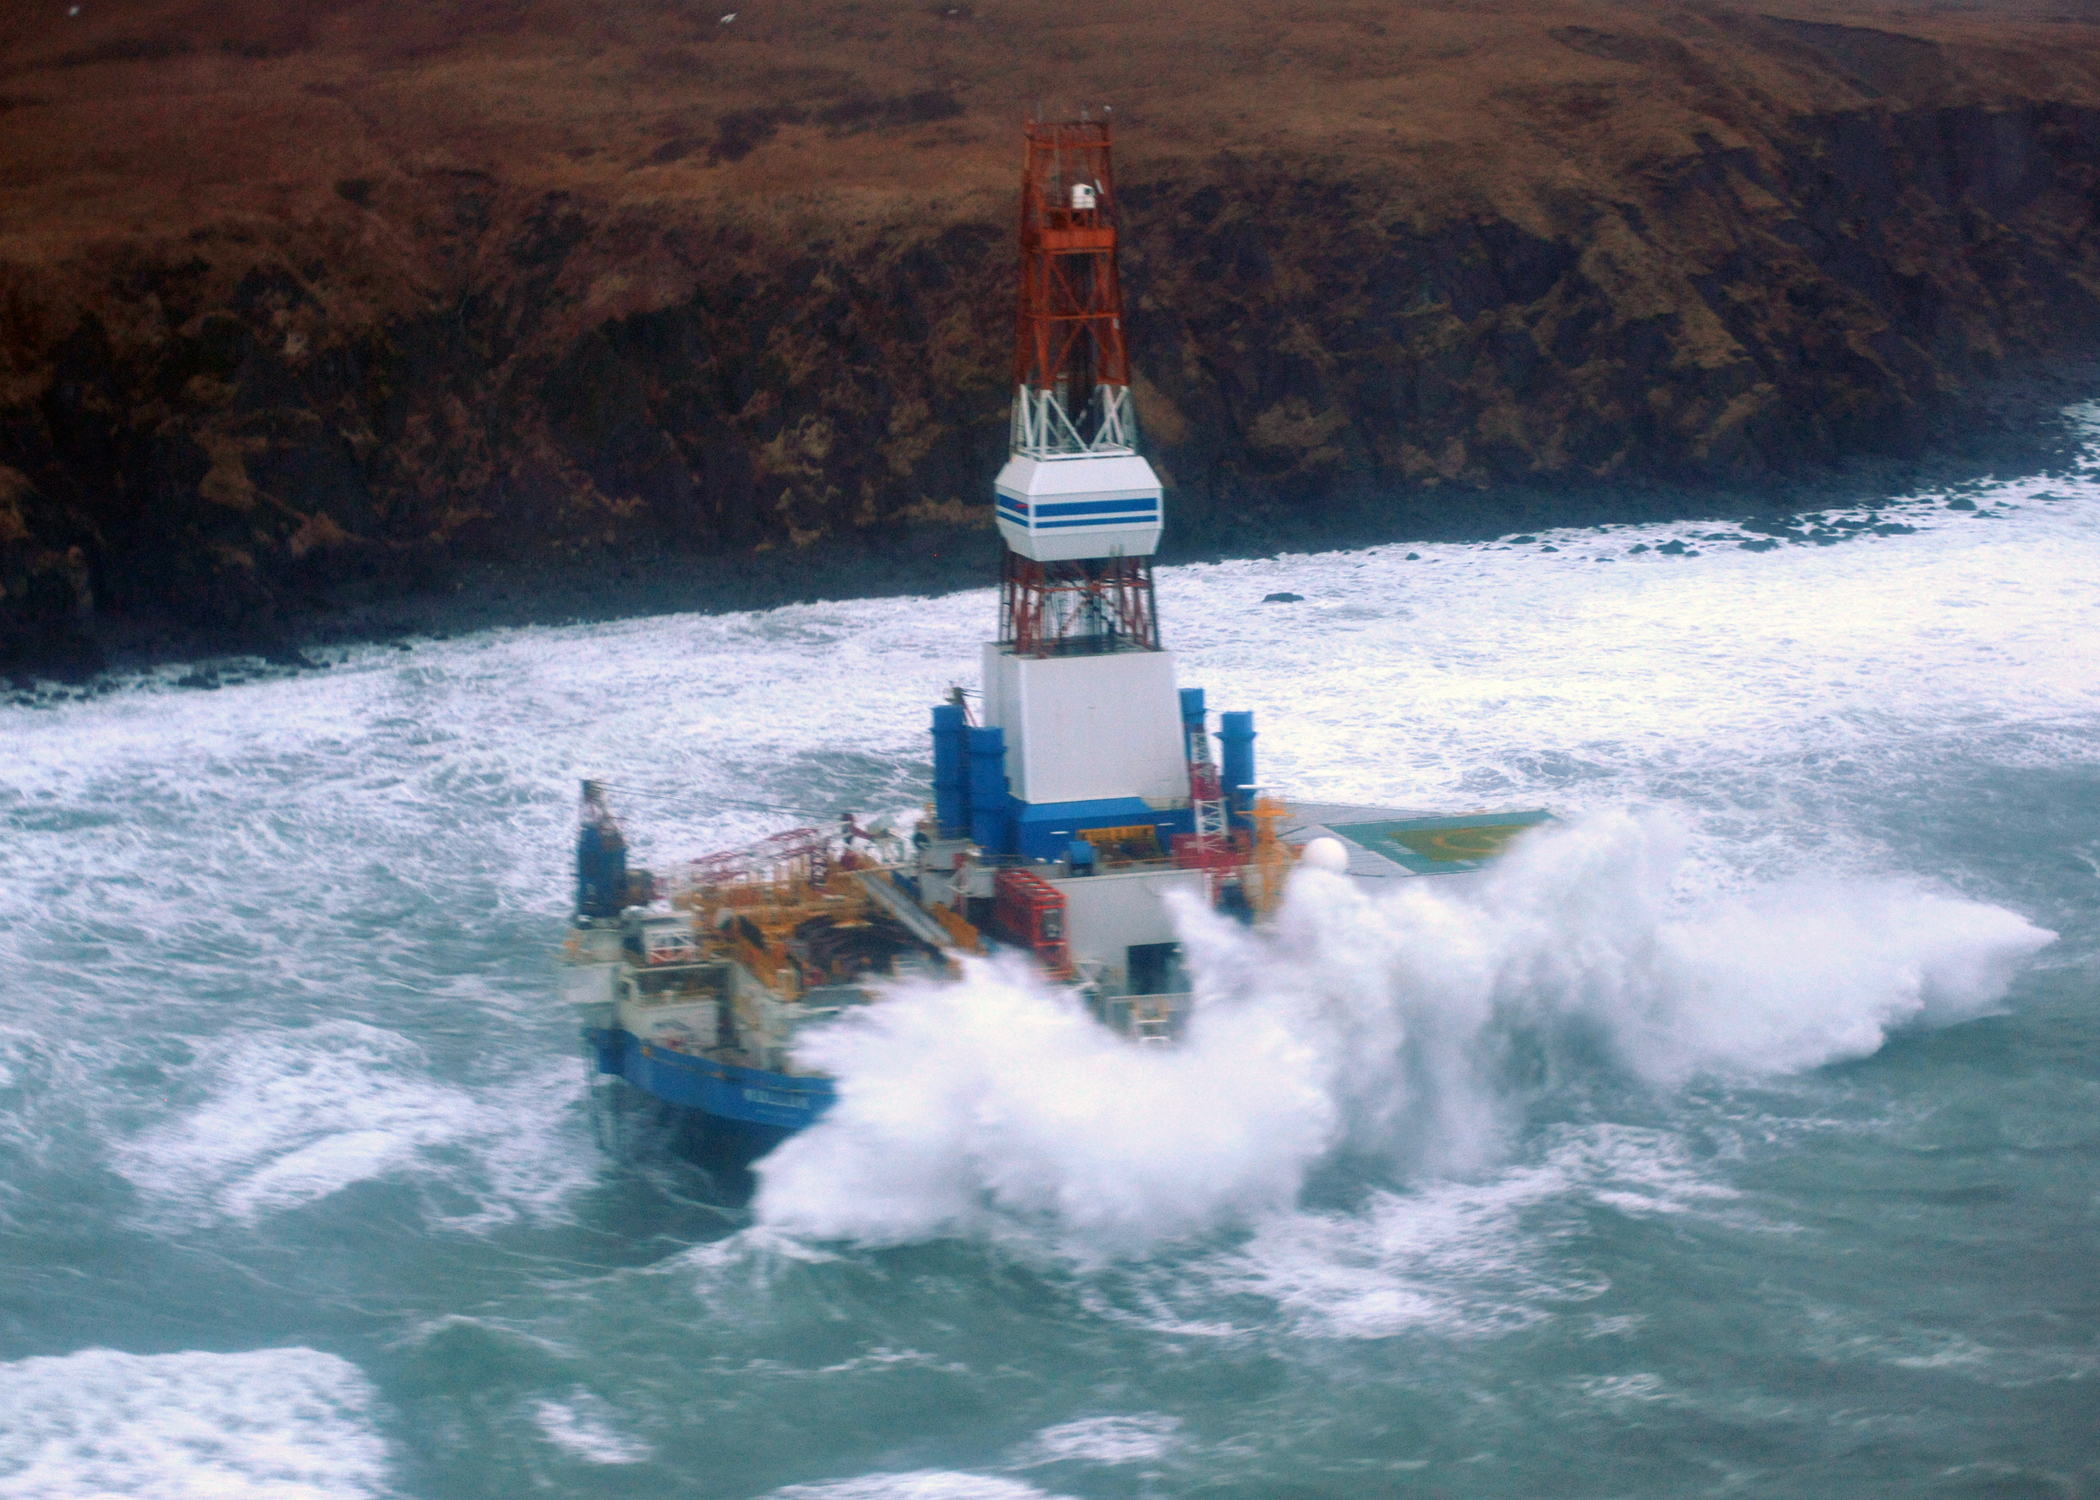 Updated: Shell Arctic drilling rig runs aground in Alaska